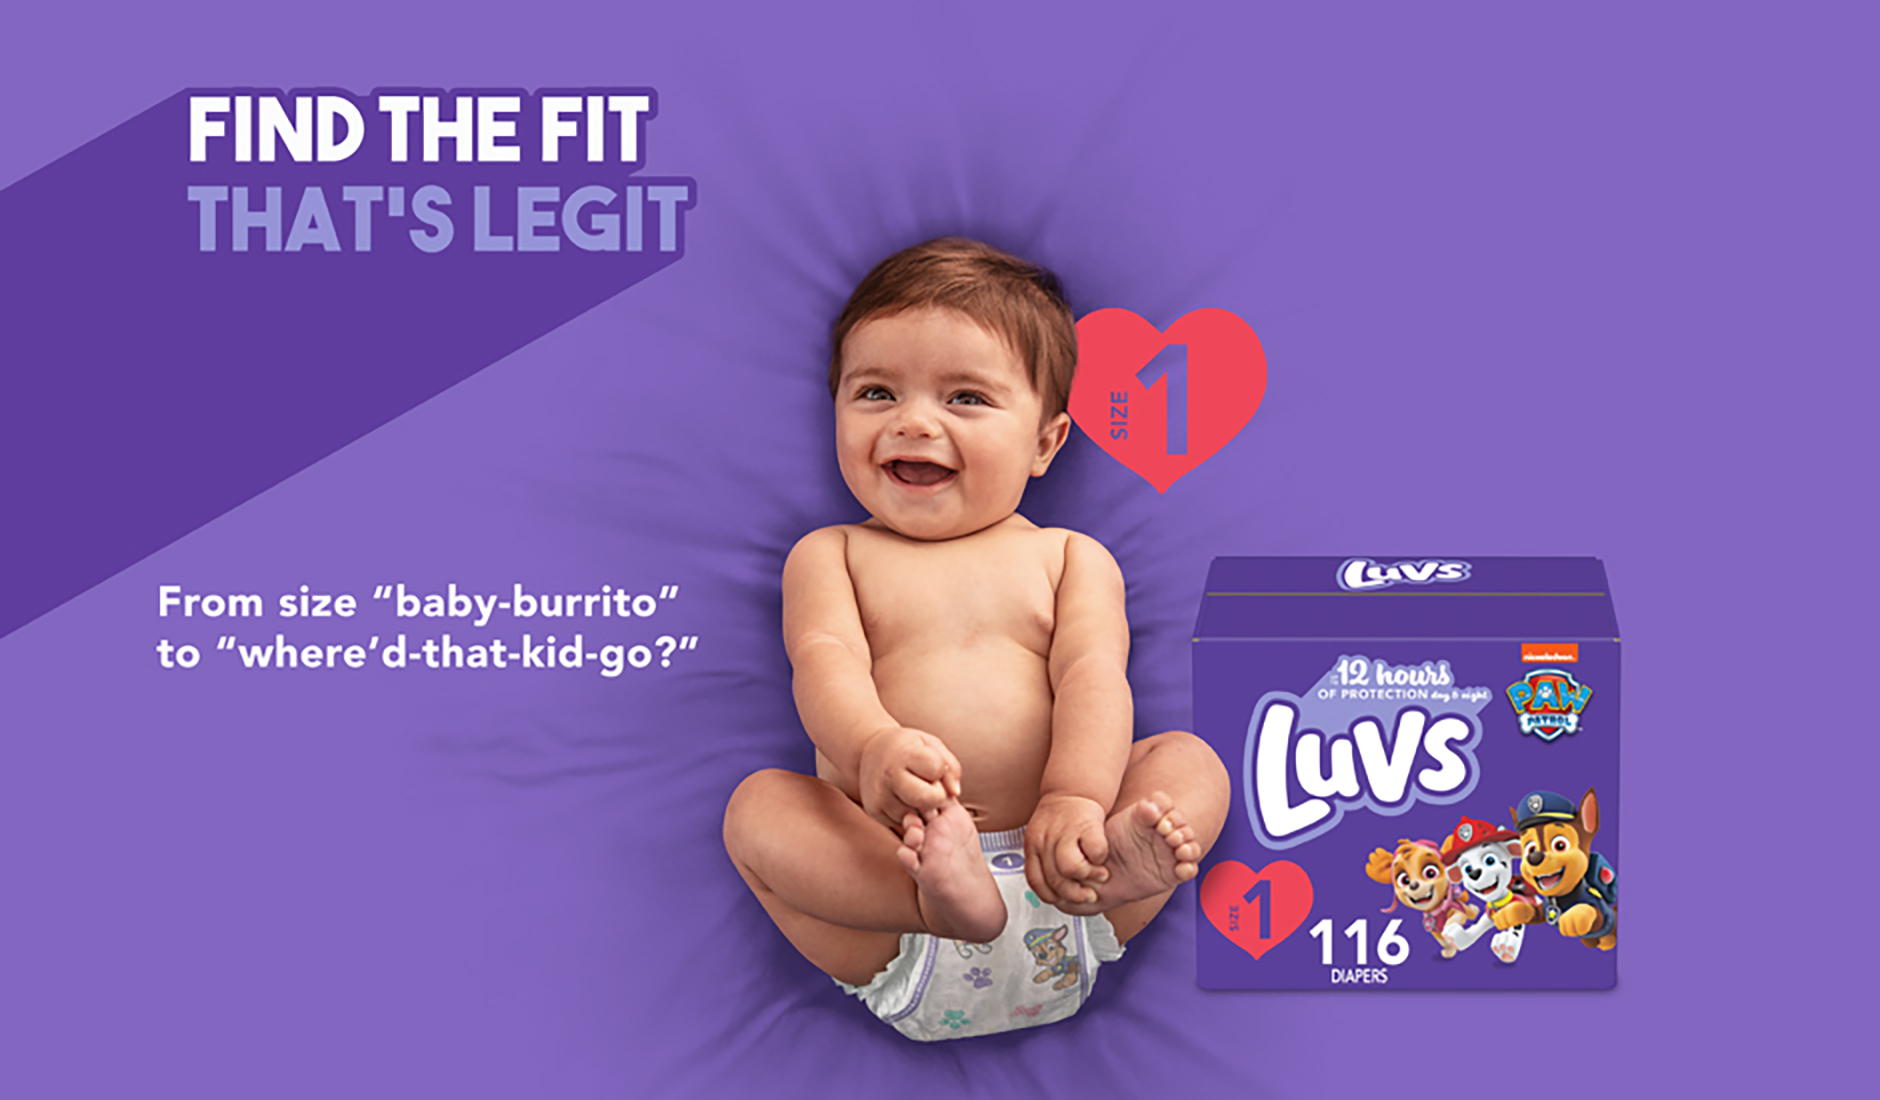 Luvs Pro Level Leak Protection Diapers Giant Pack, Size 7, Over 41 lbs, 88  count